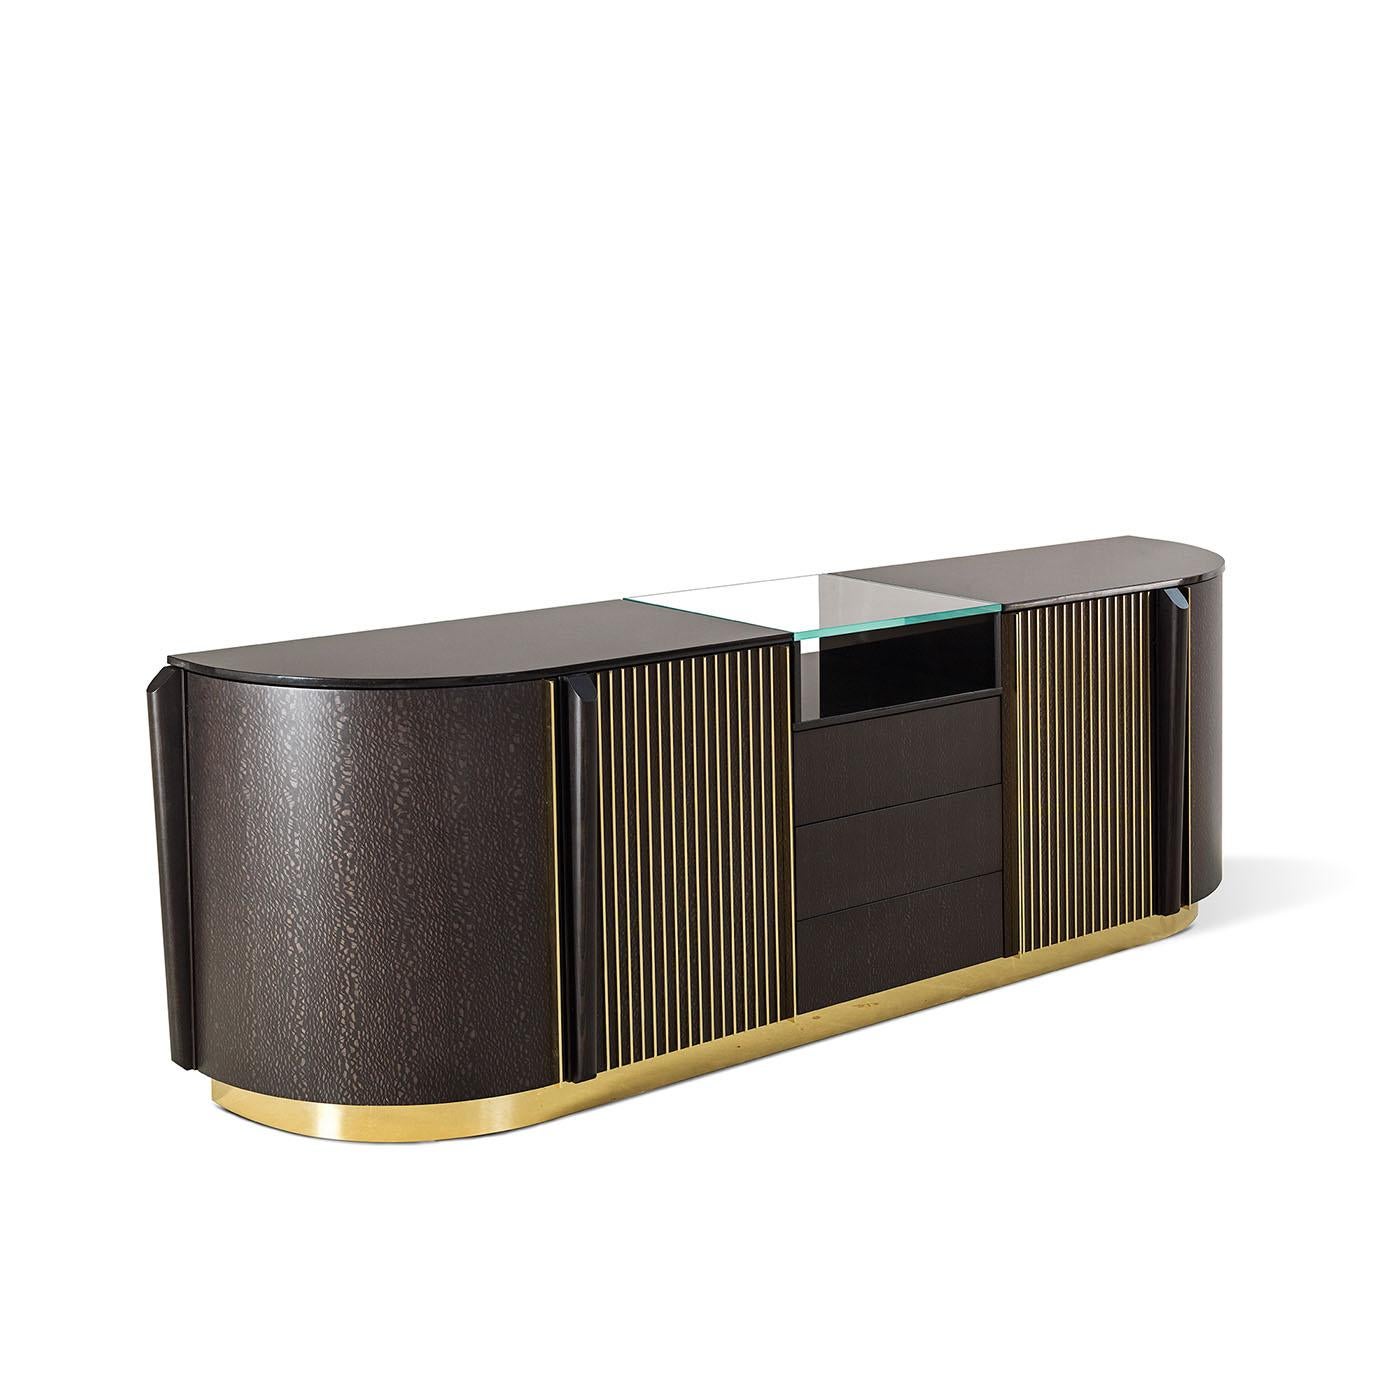 This sideboard is crafted from carvalho wood with brass details and a Nero Assoluto marble top.